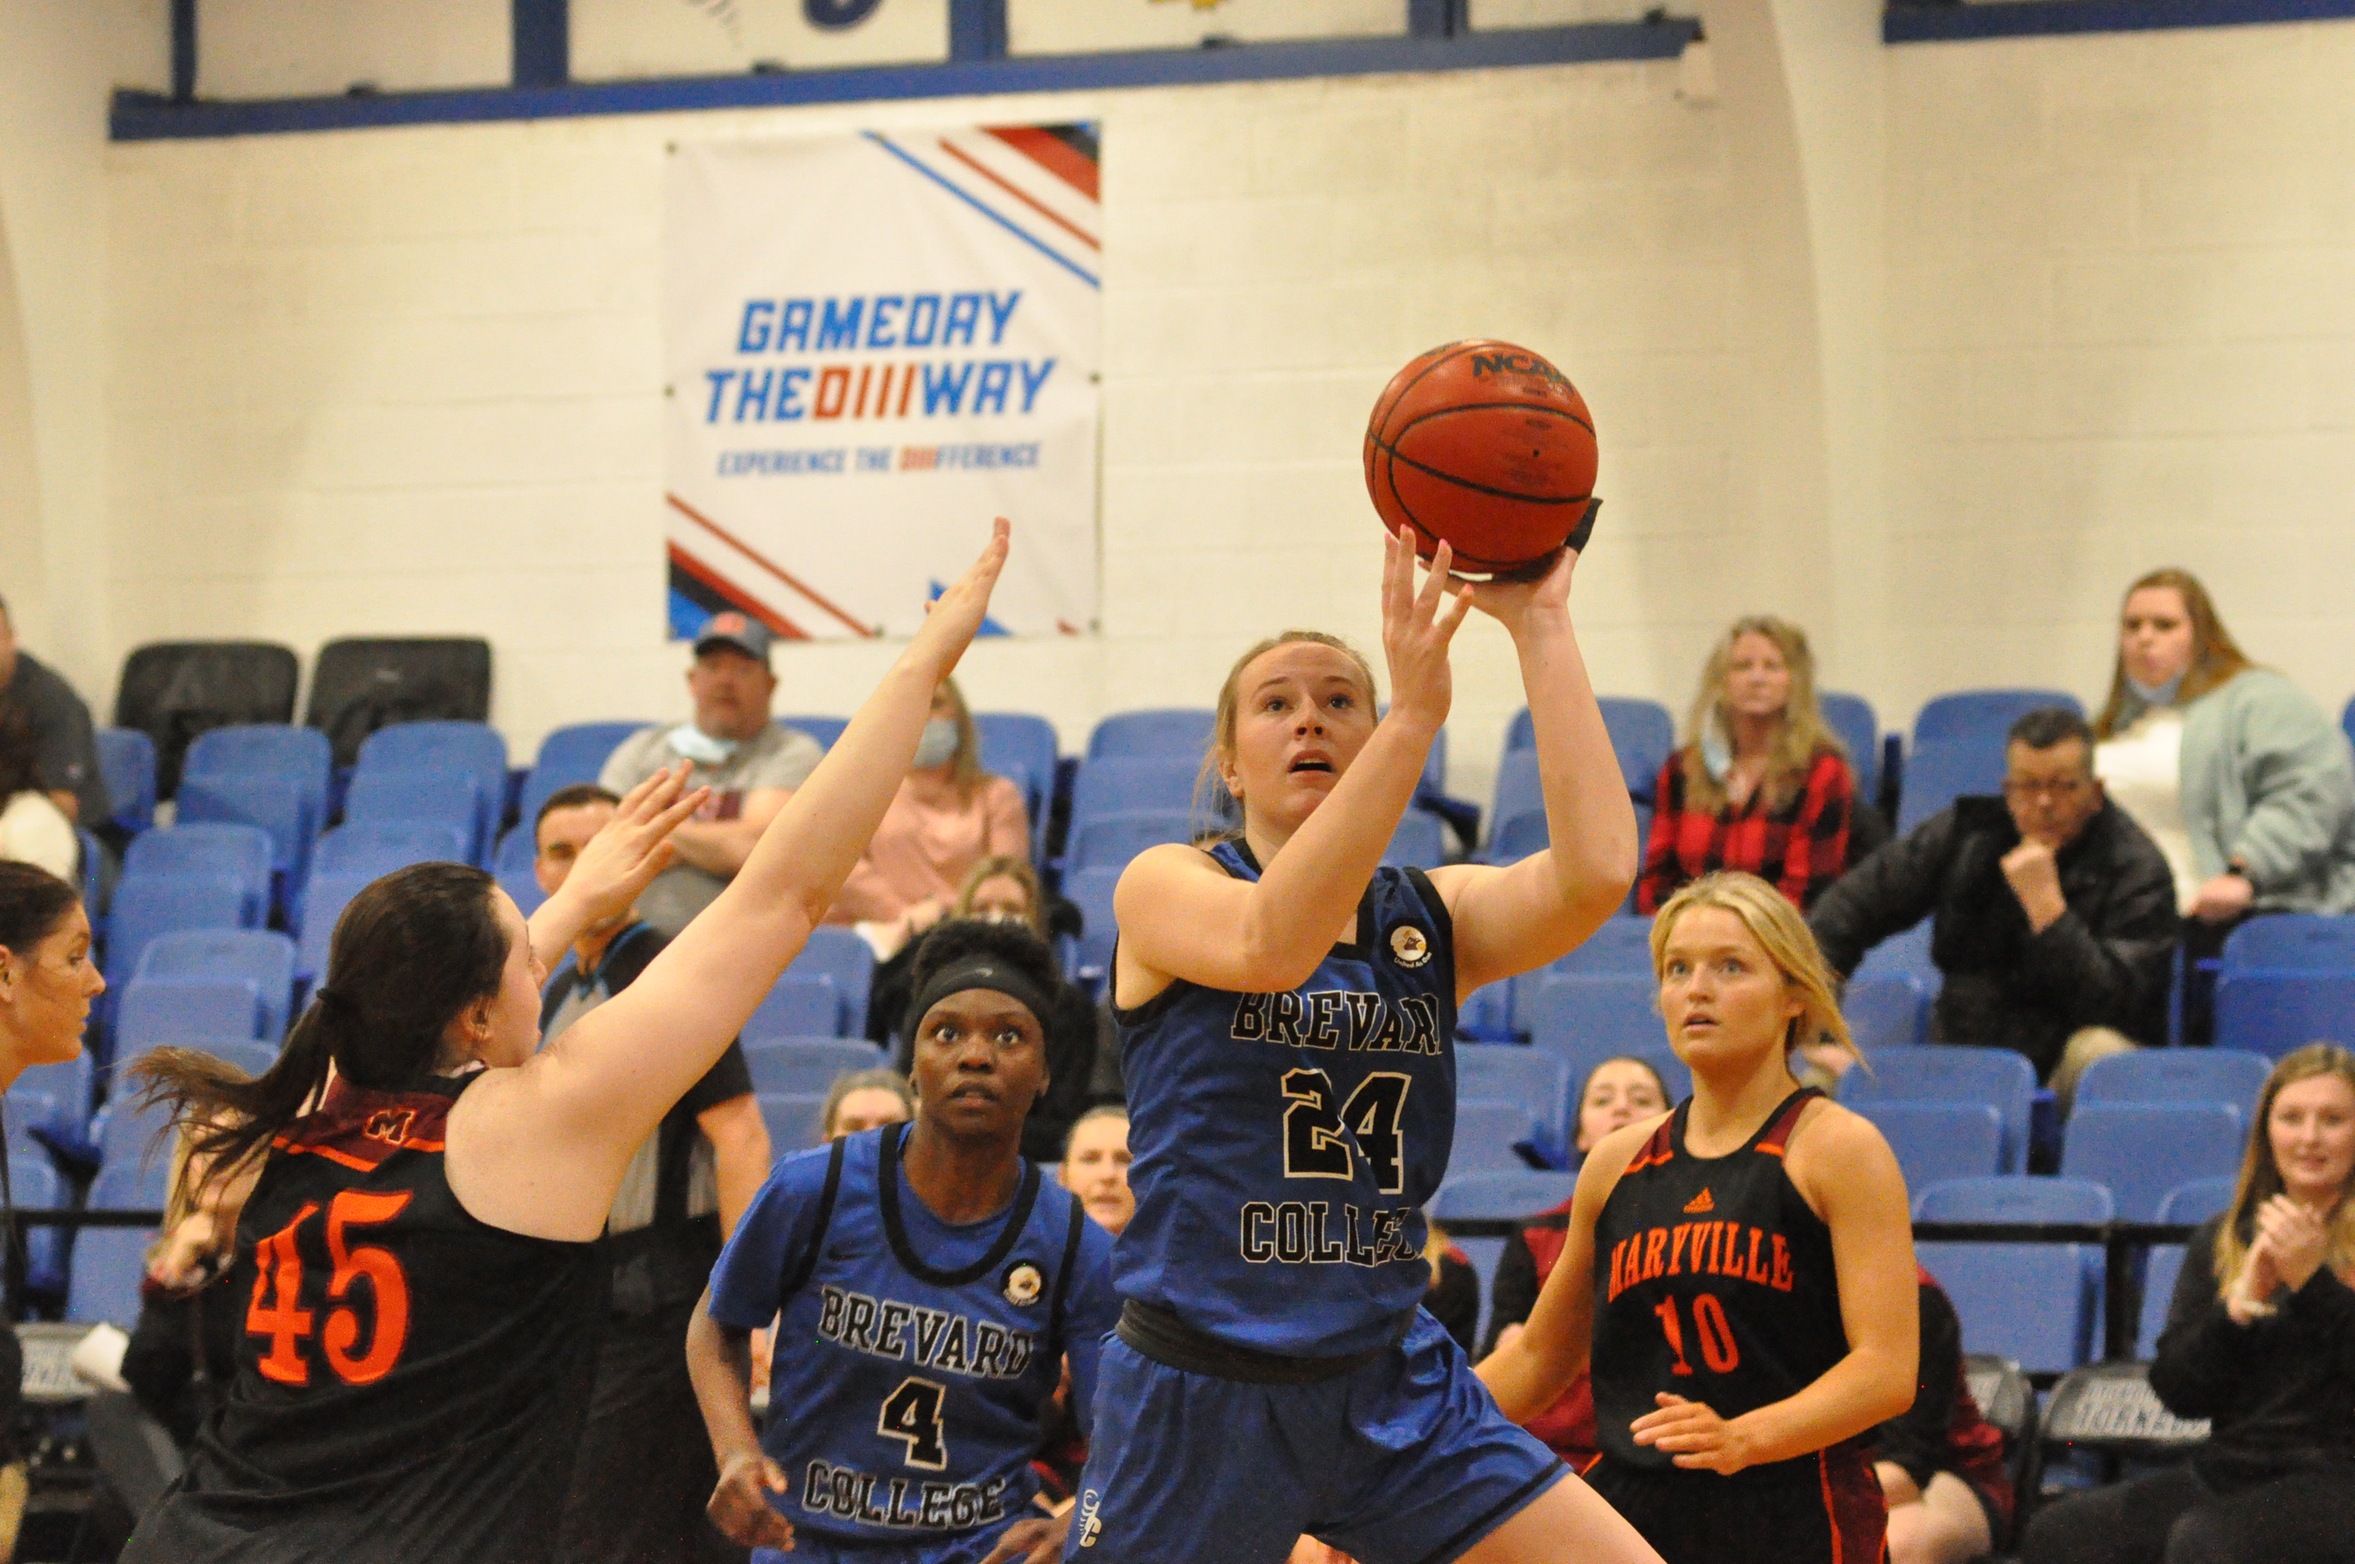 Panthers Surge Past Tornados in Second-Half Run, 73-57